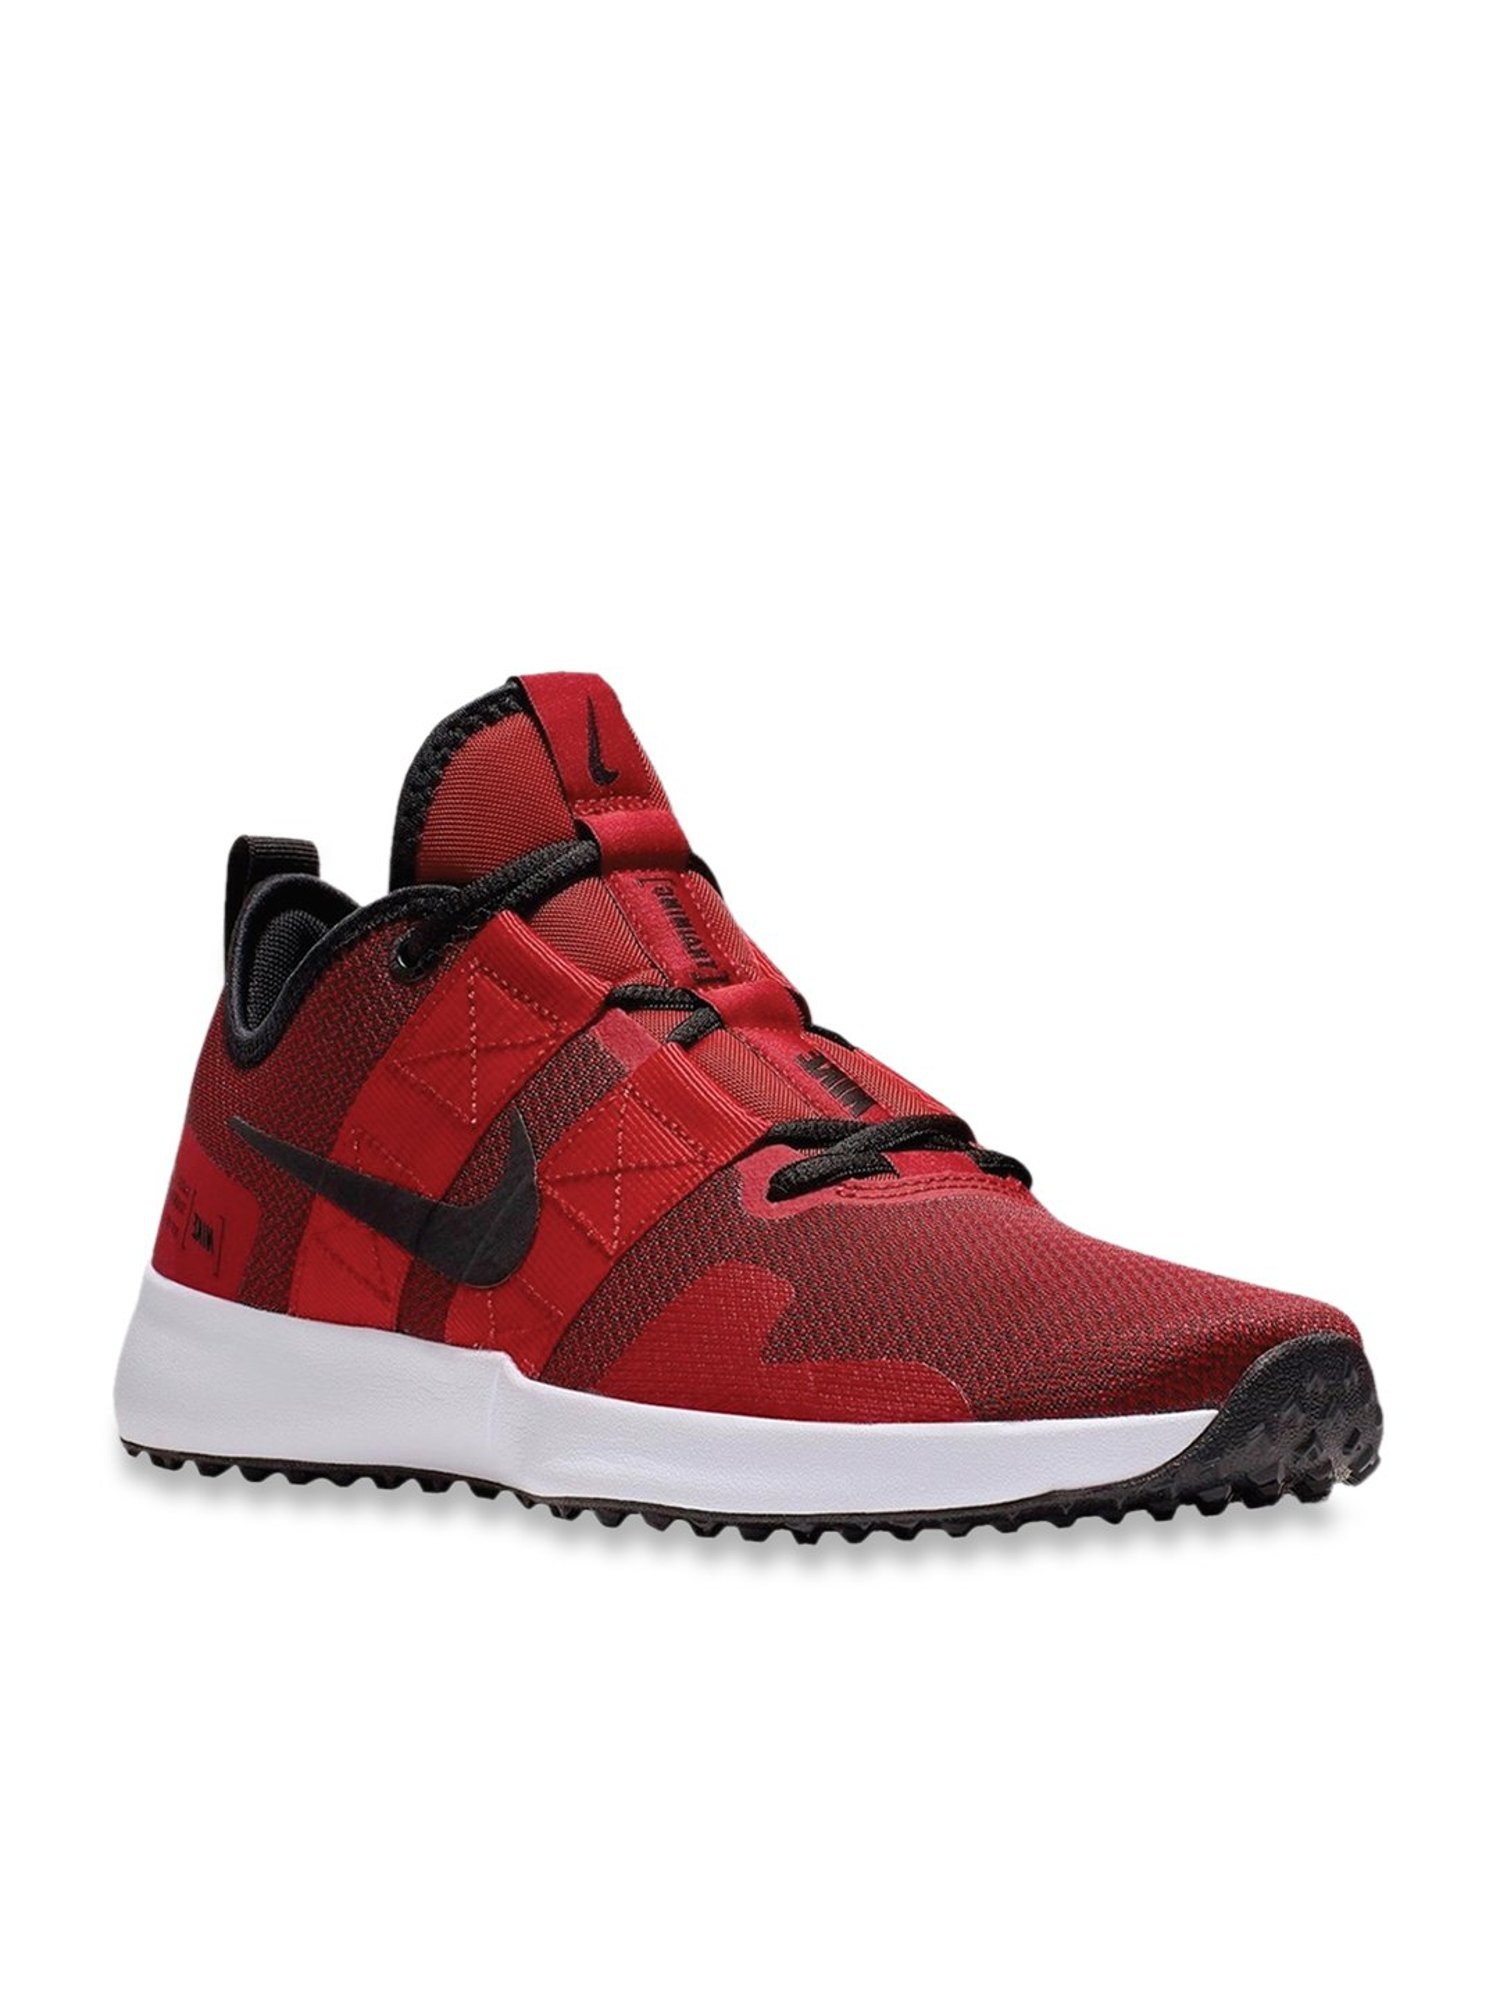 nike varsity compete tr 2 red